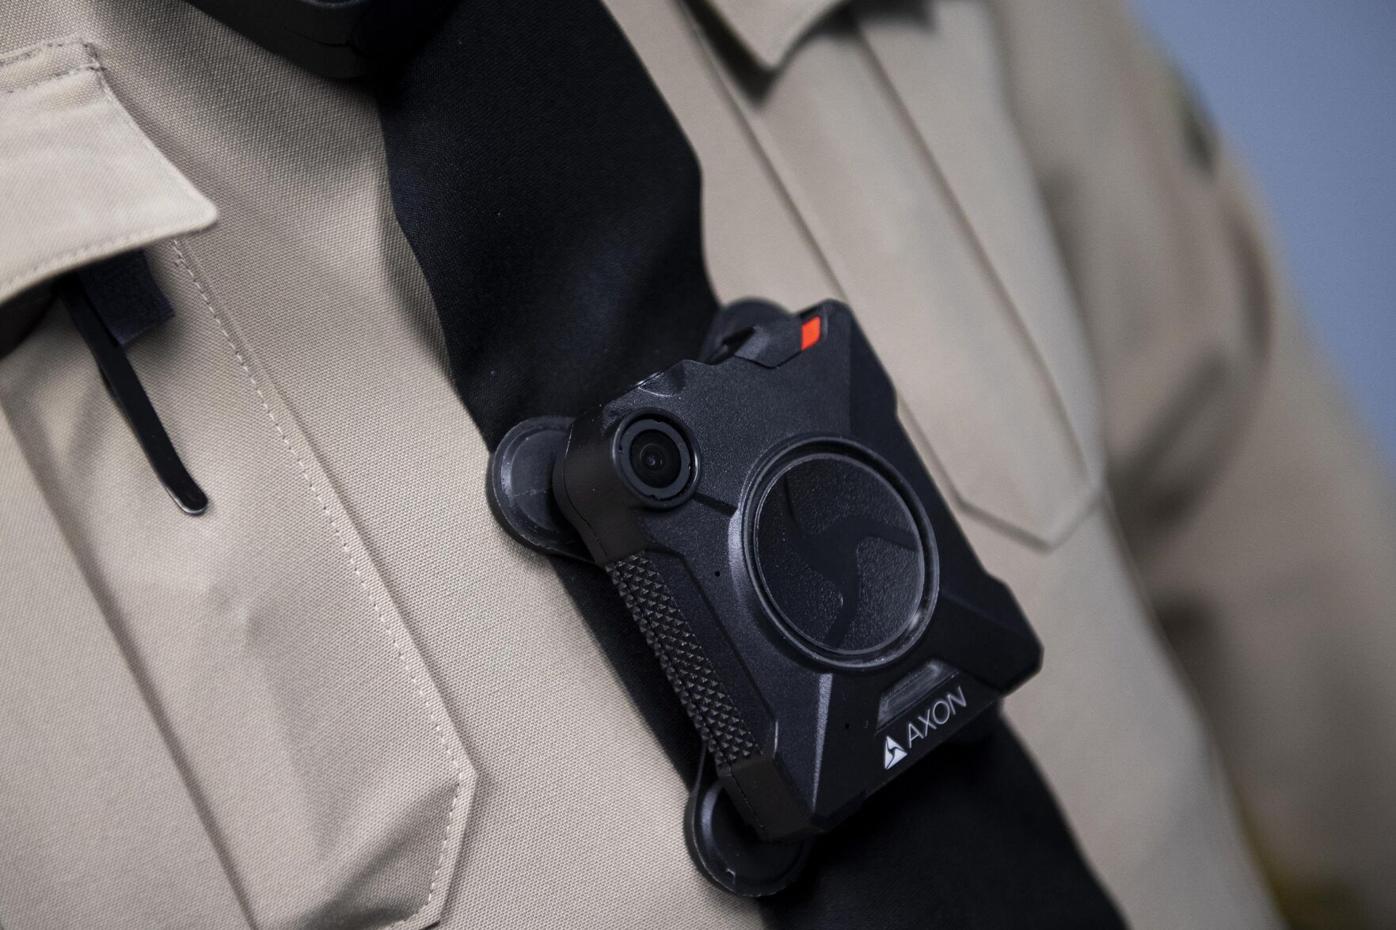 High costs are prematurely ending police body camera programs - Vox